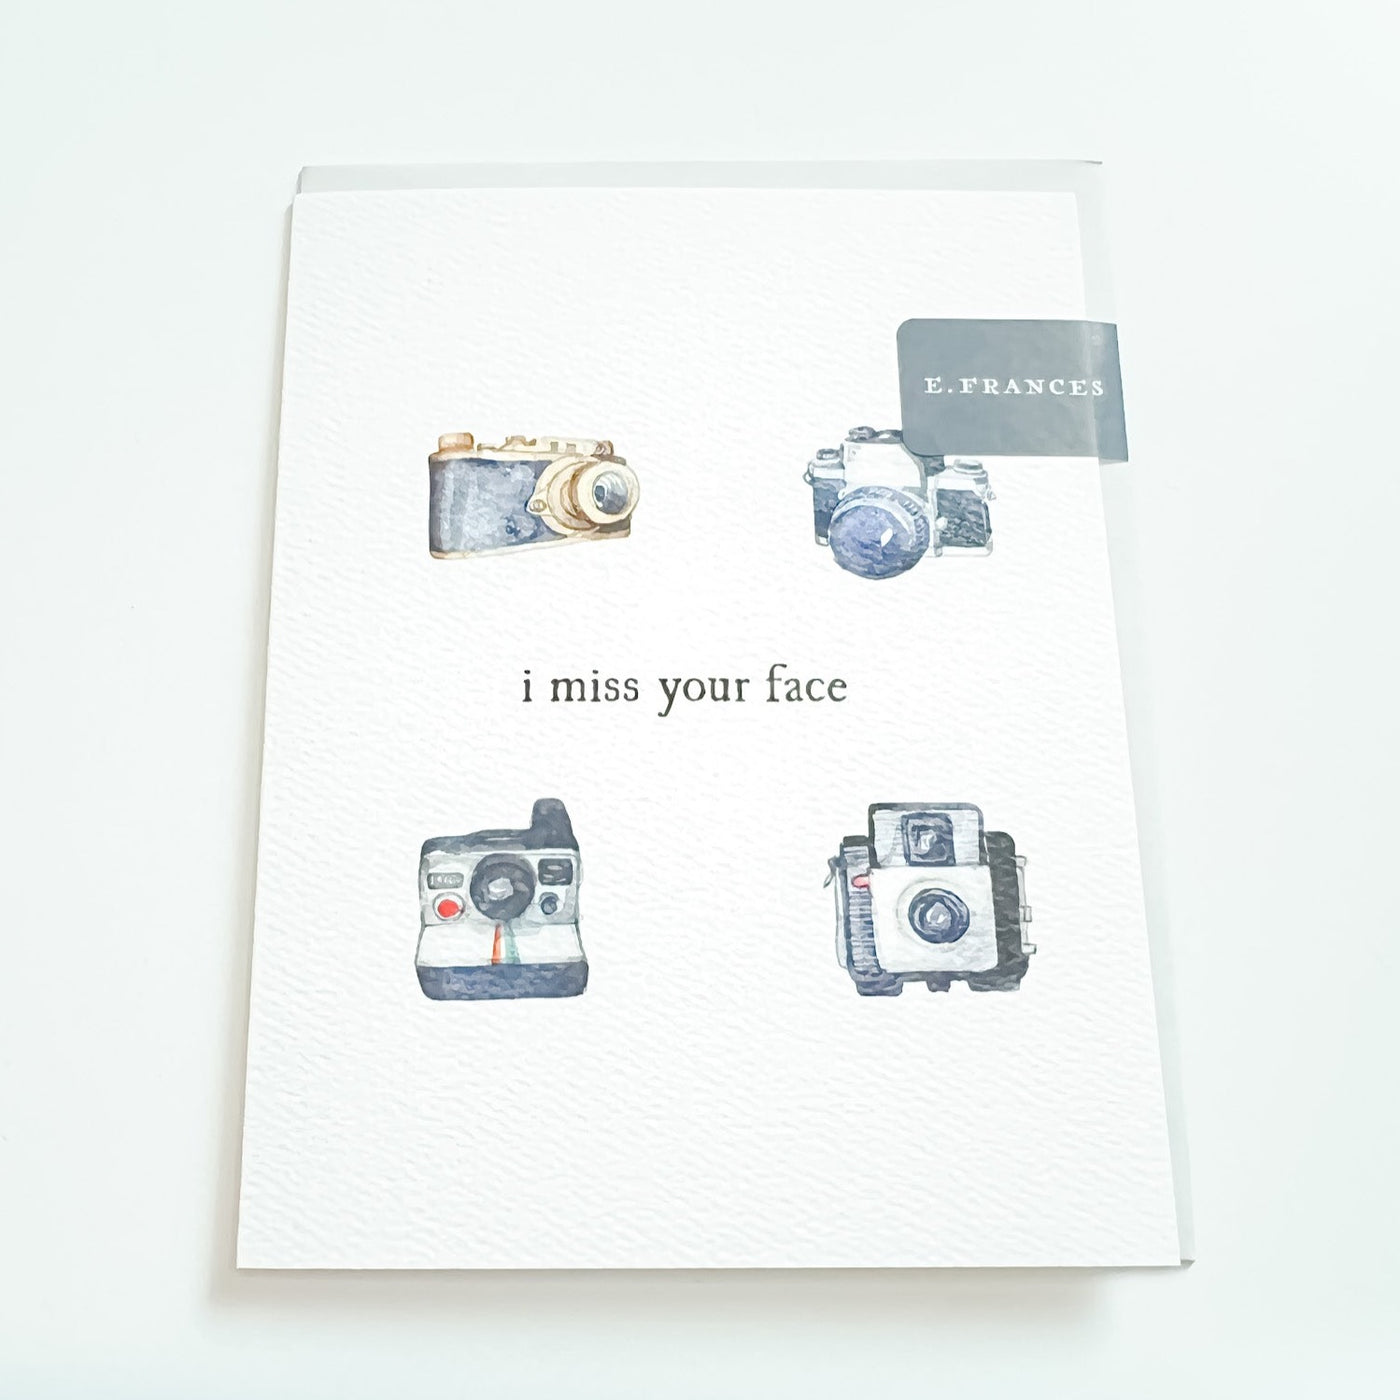 " I miss your face" card